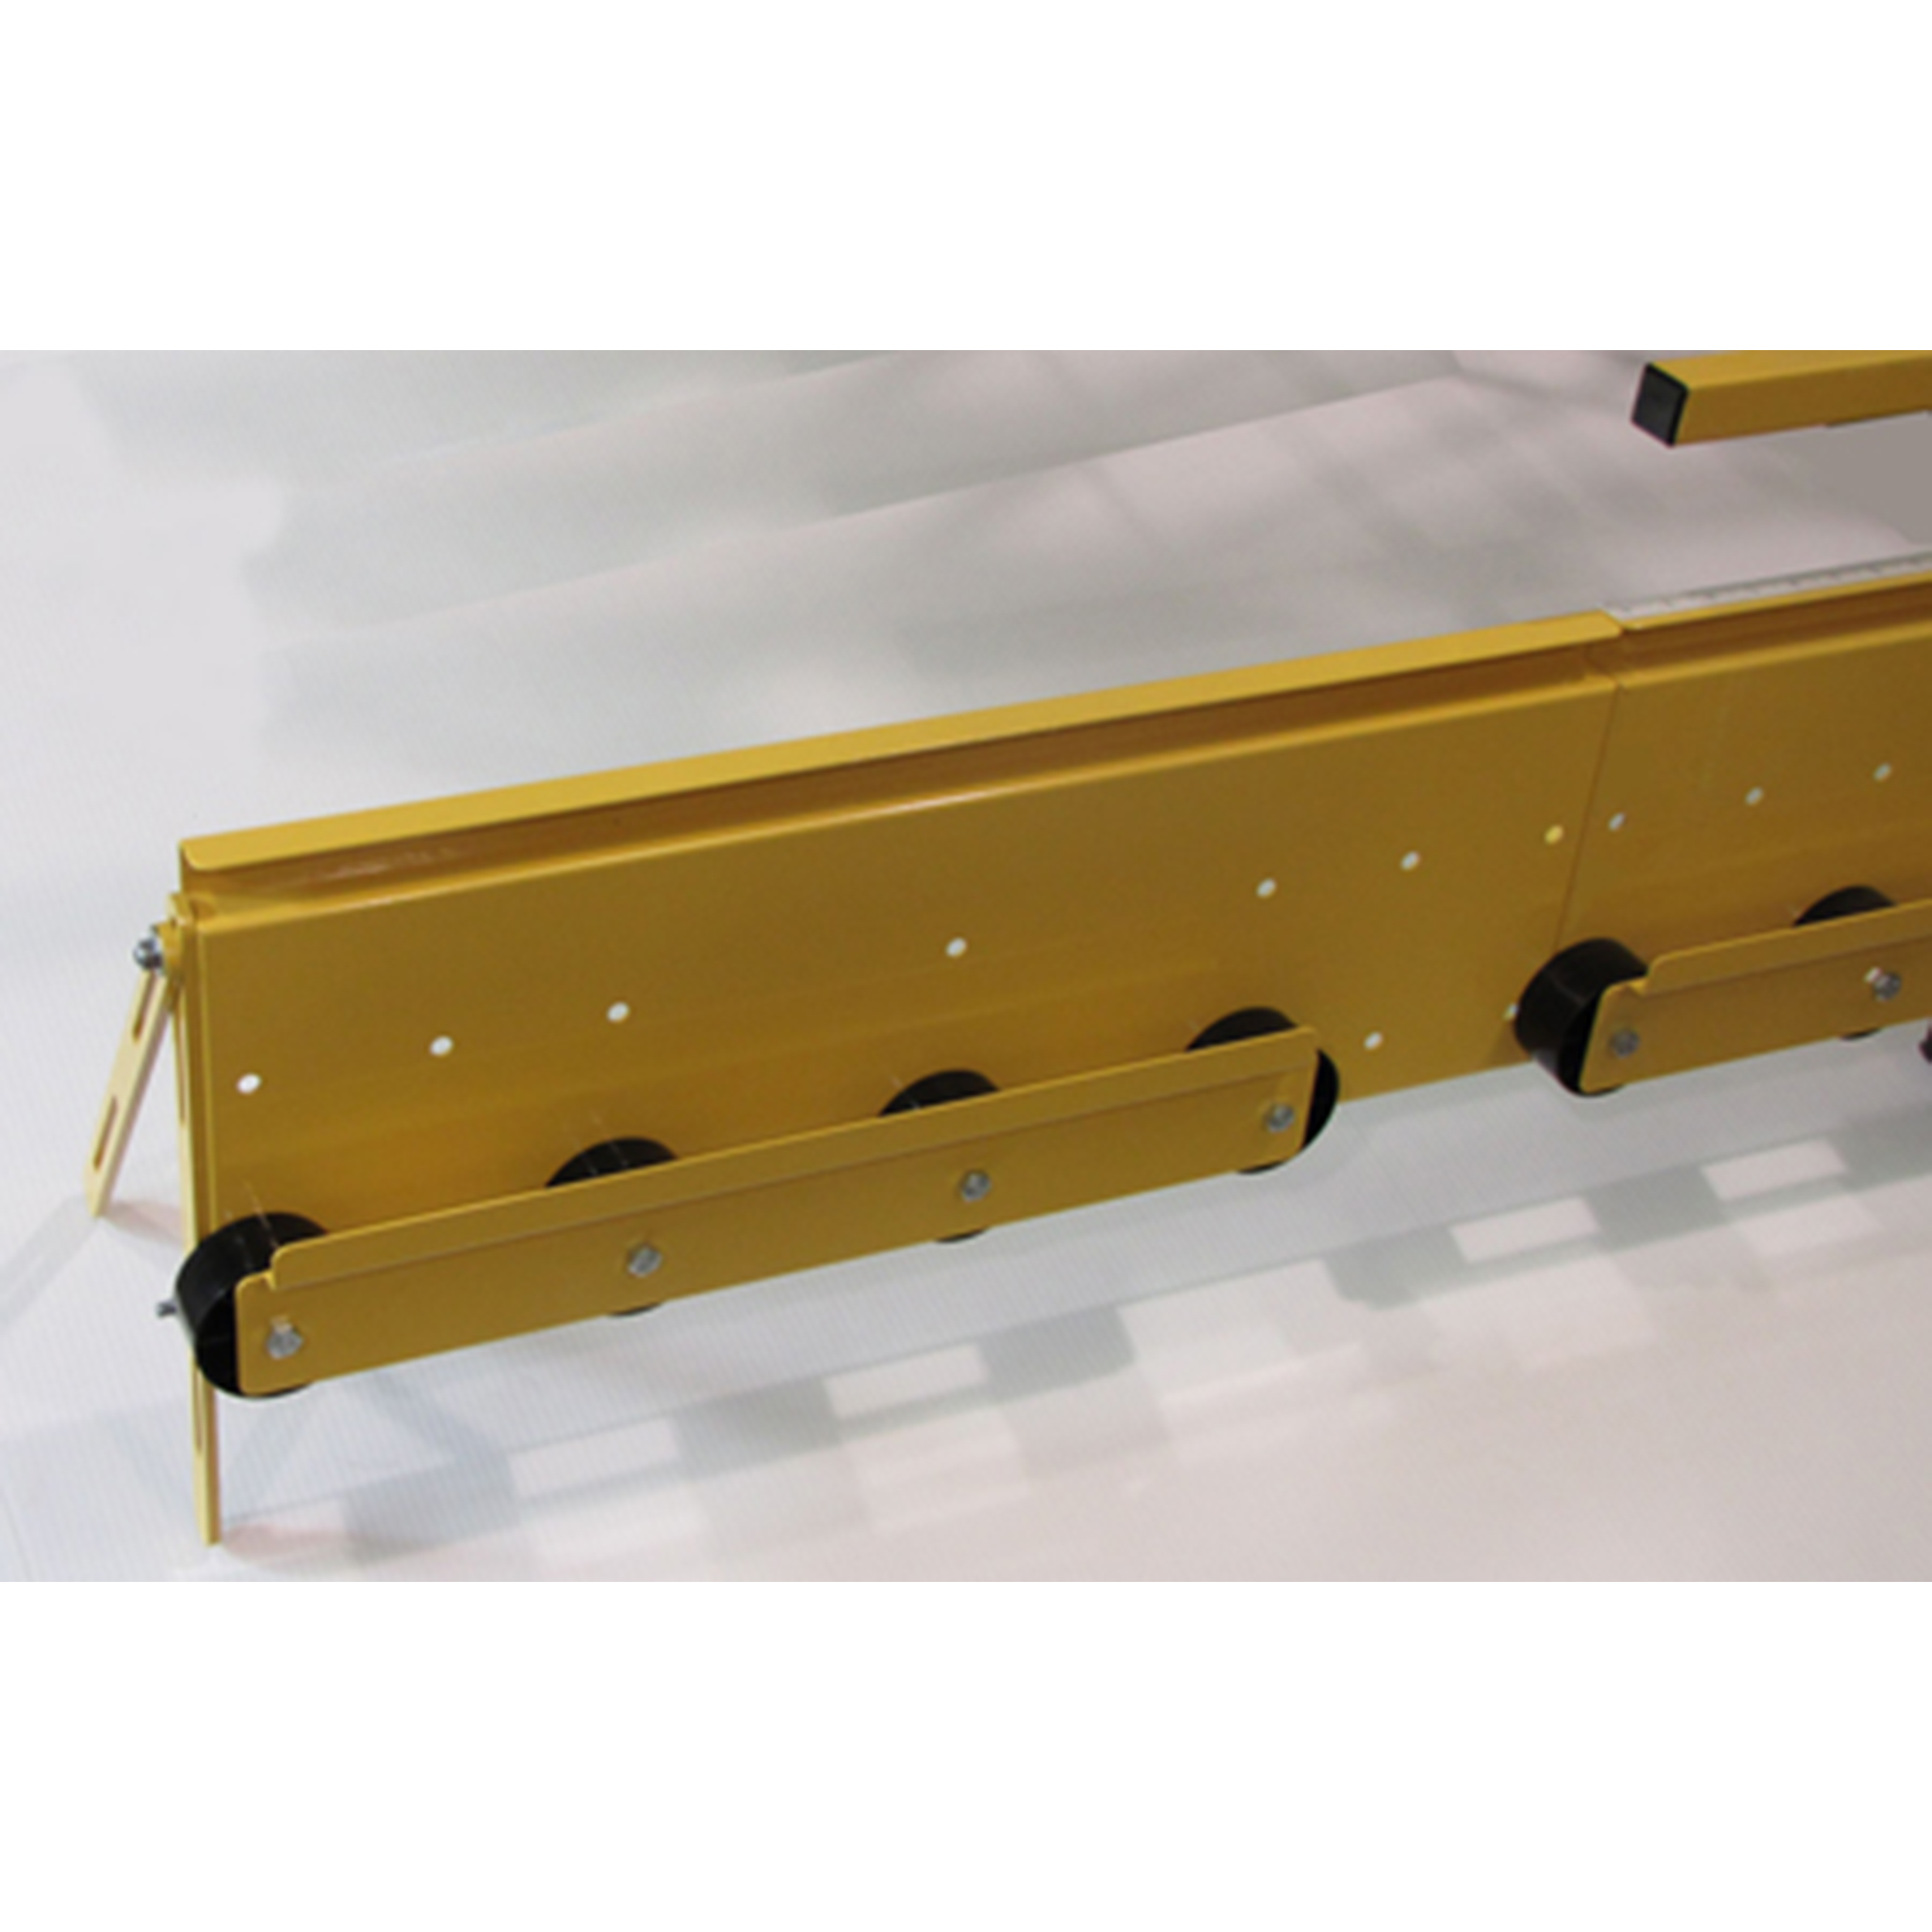 Builders Extensions For Saw Trax Compact Panel Saws